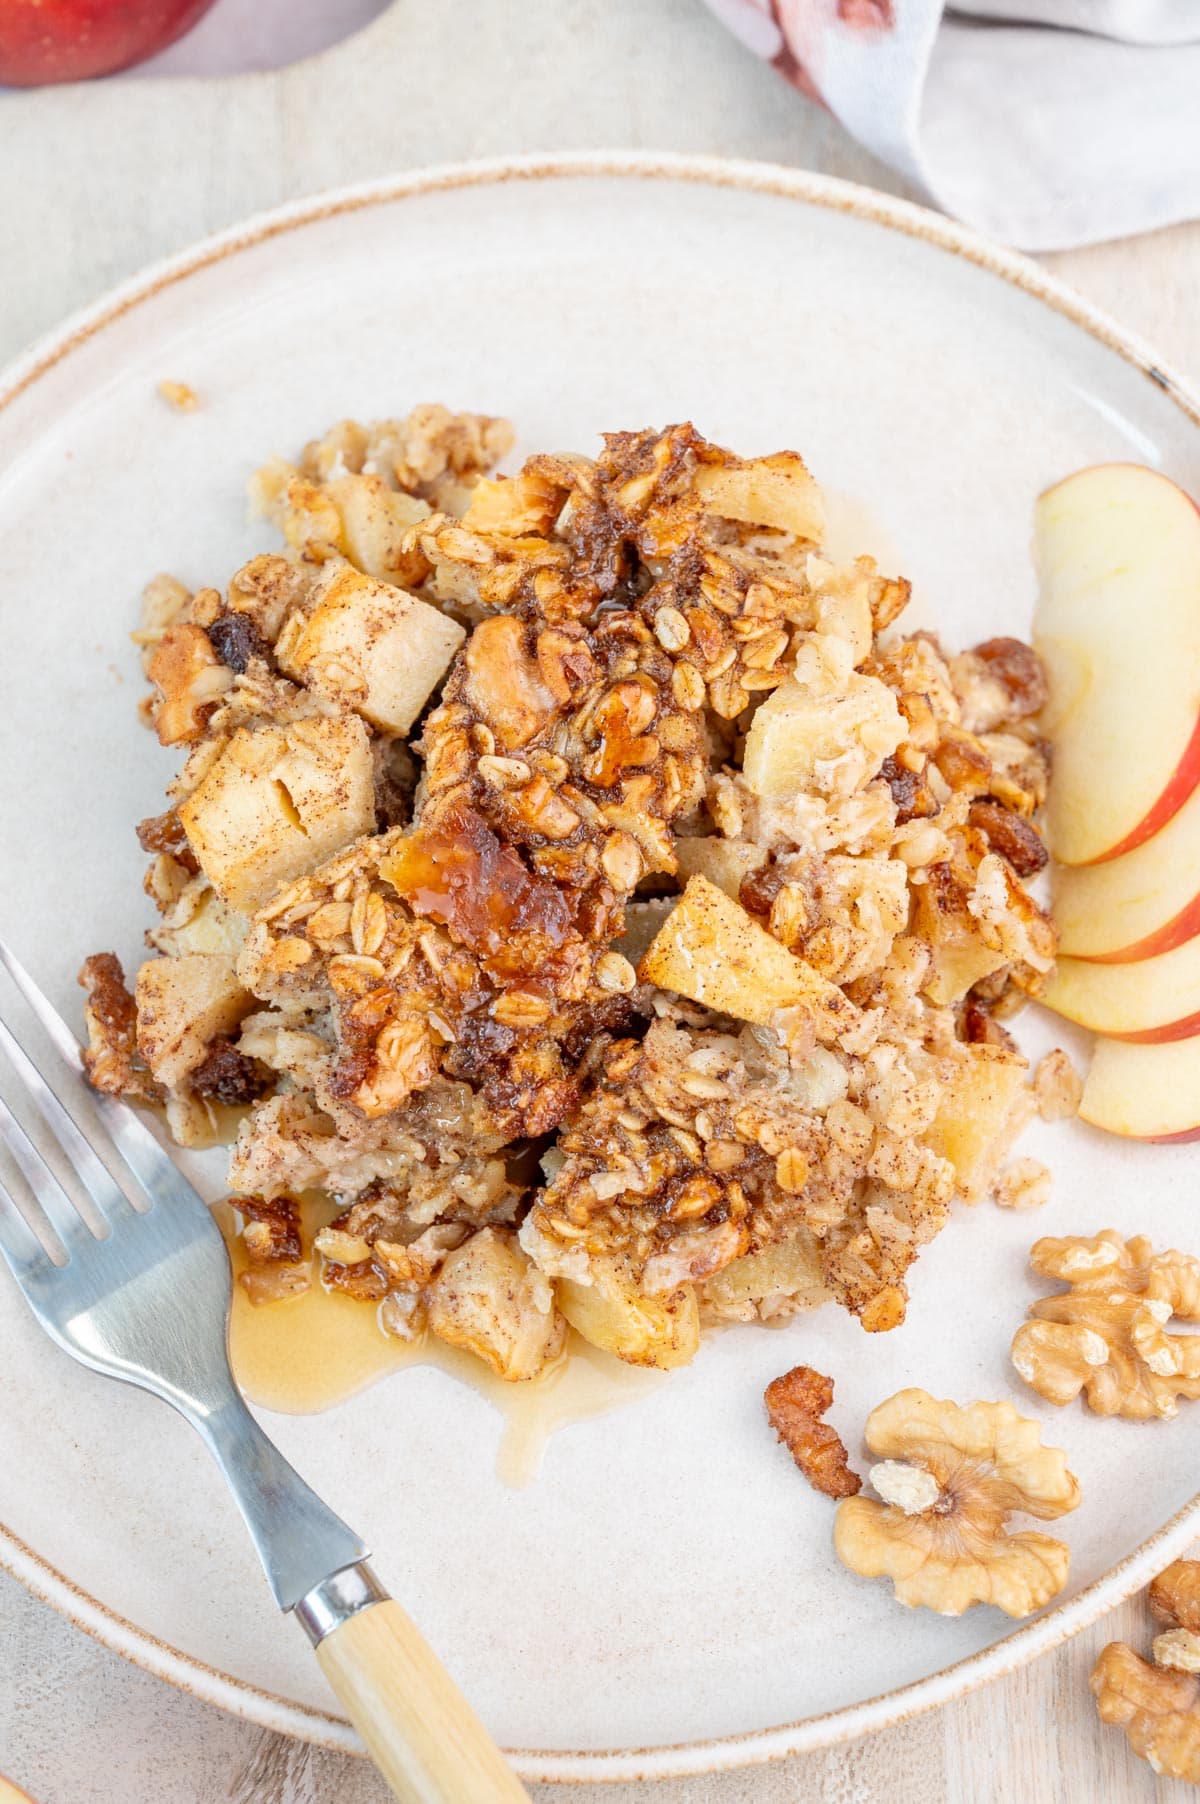 One serving of apple cinnamon baked oatmeal on a white plate.